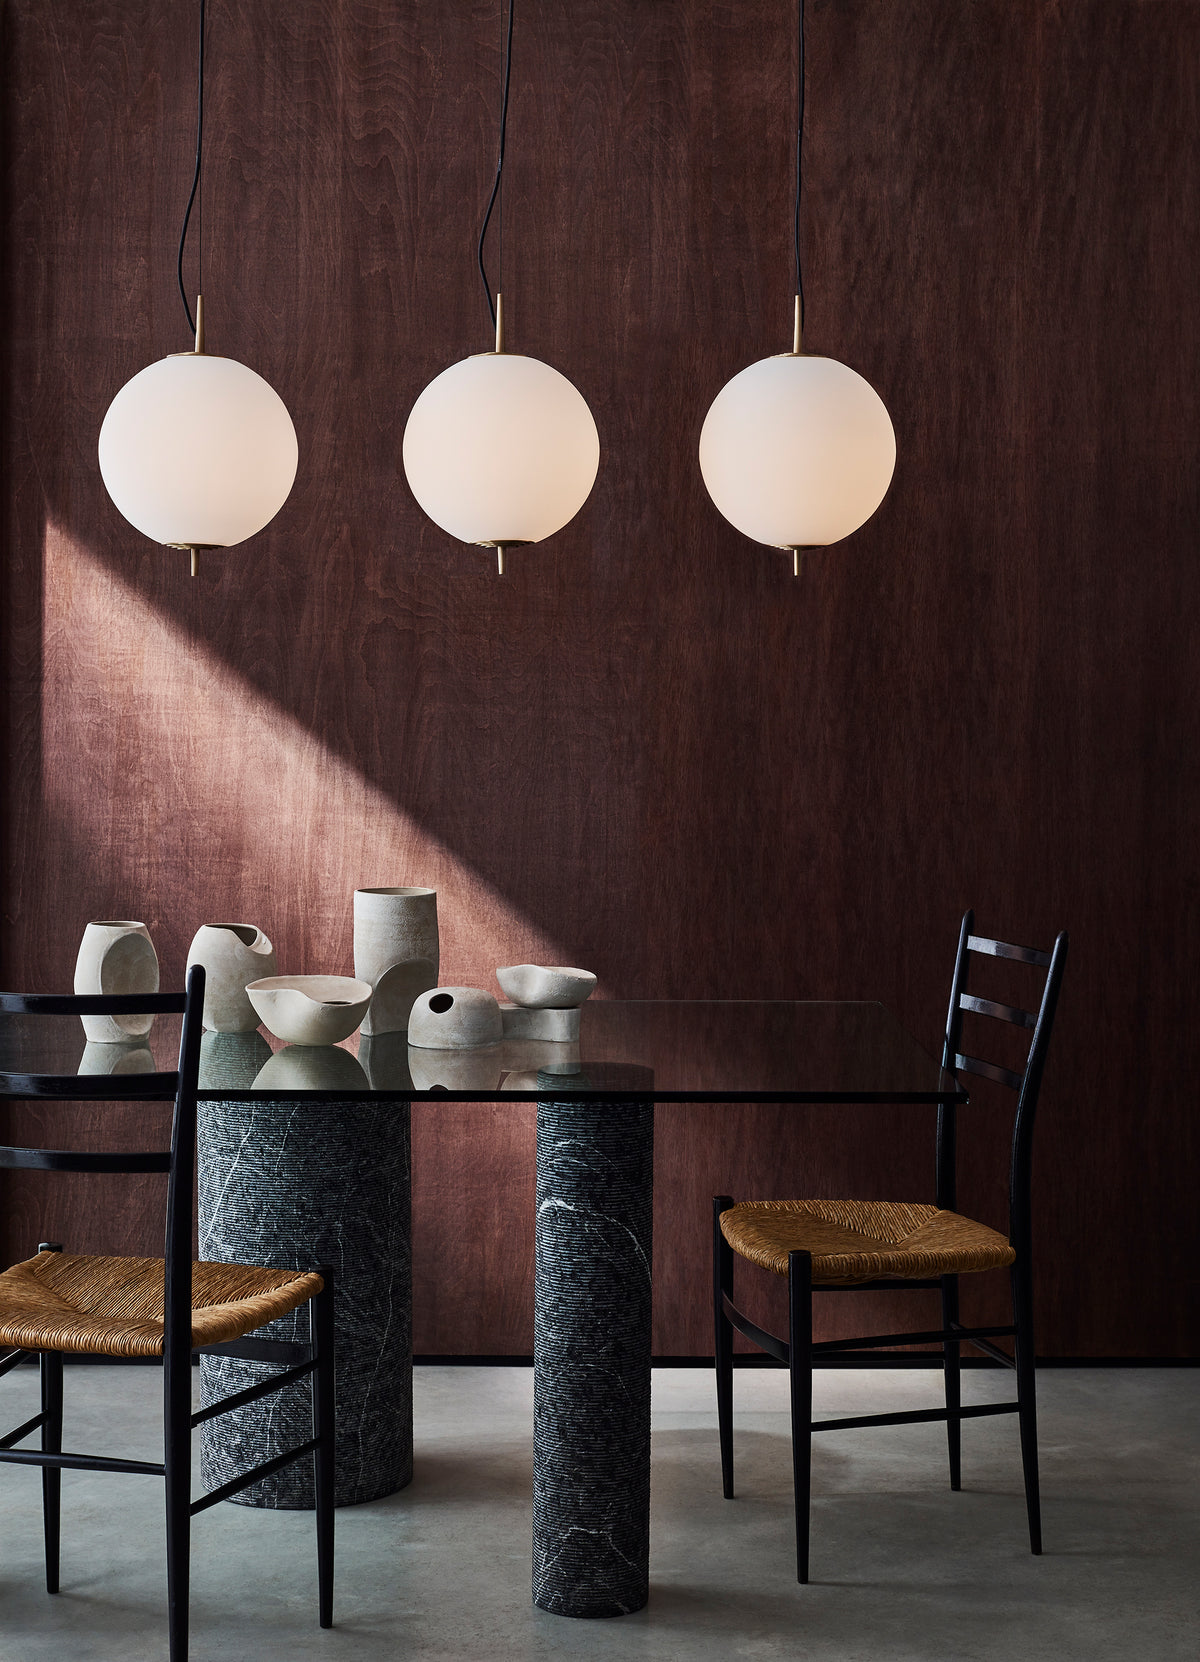 Grouping of three Nova Globe Pendant Lights with wooden panelled backdrop